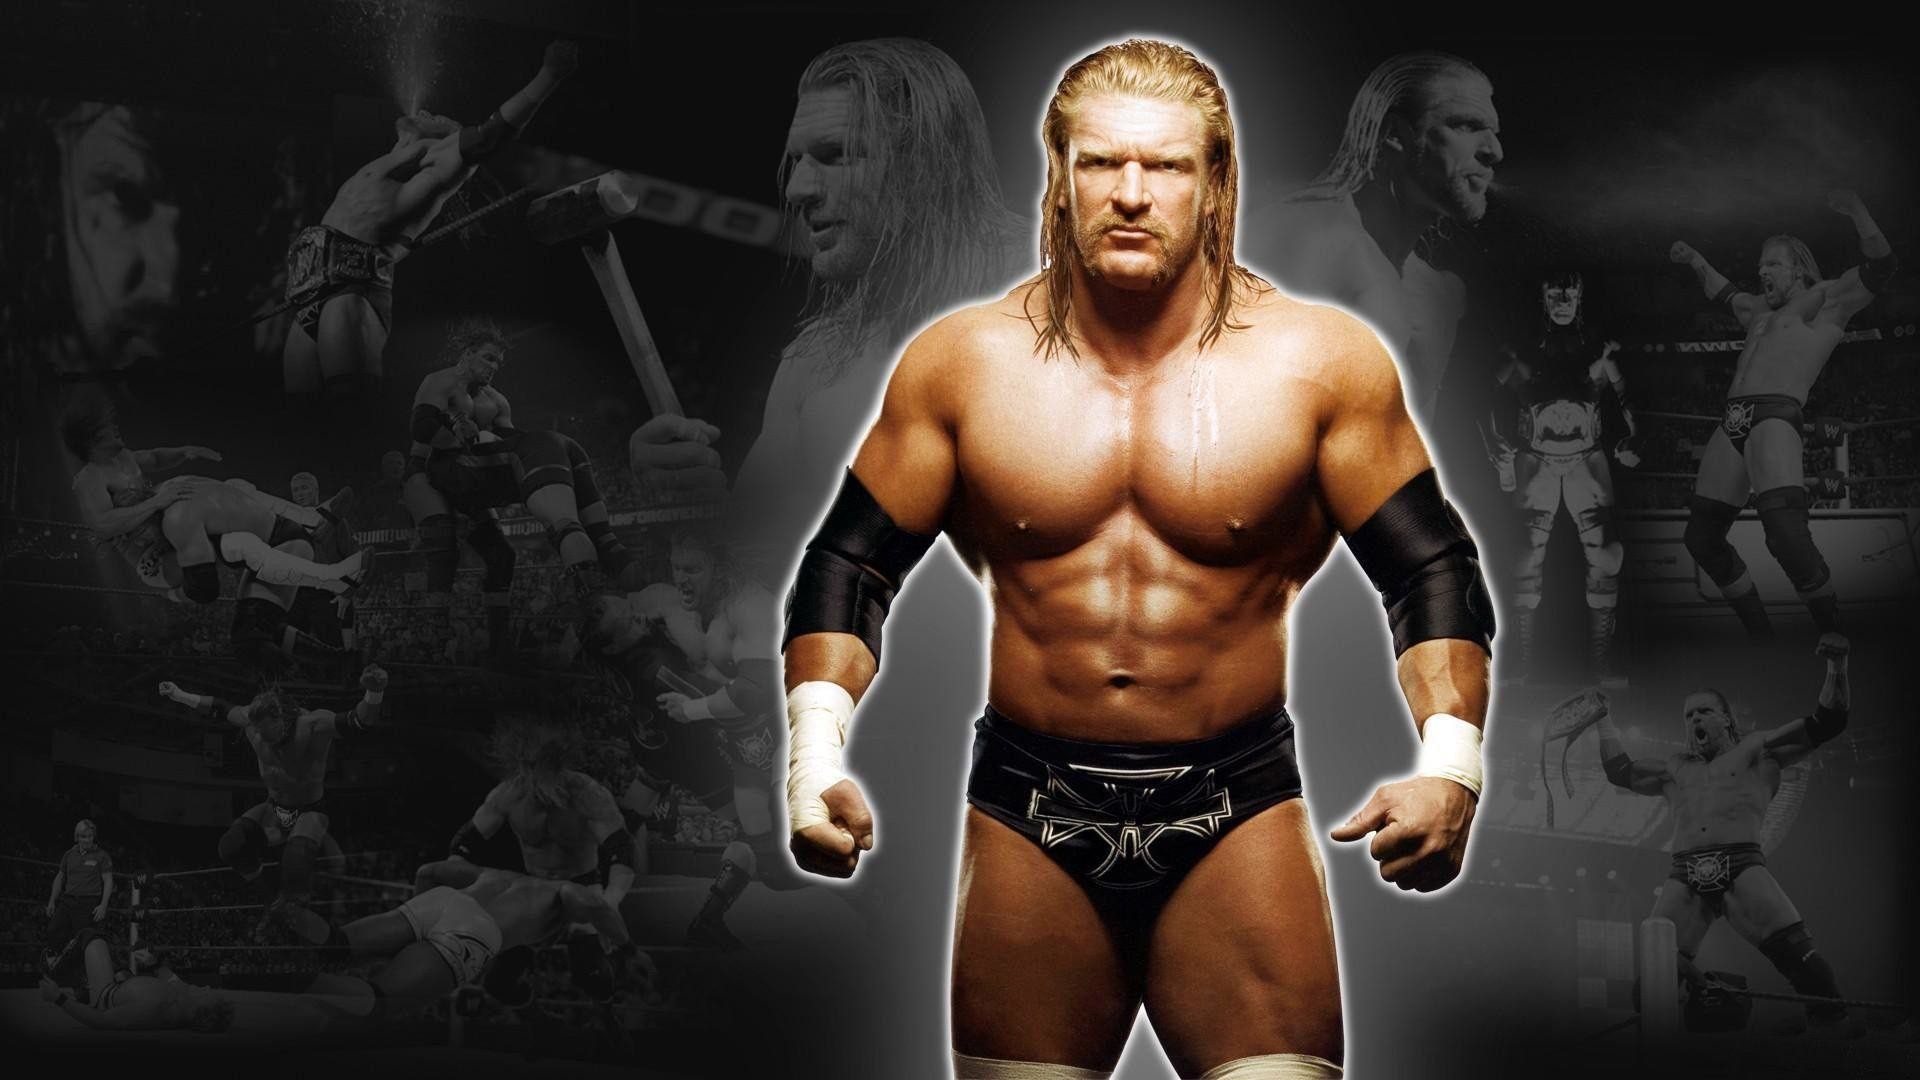 1920x1080 Triple H Archives - HD Wallpapers Free DownloadHD Wallpapers Free .